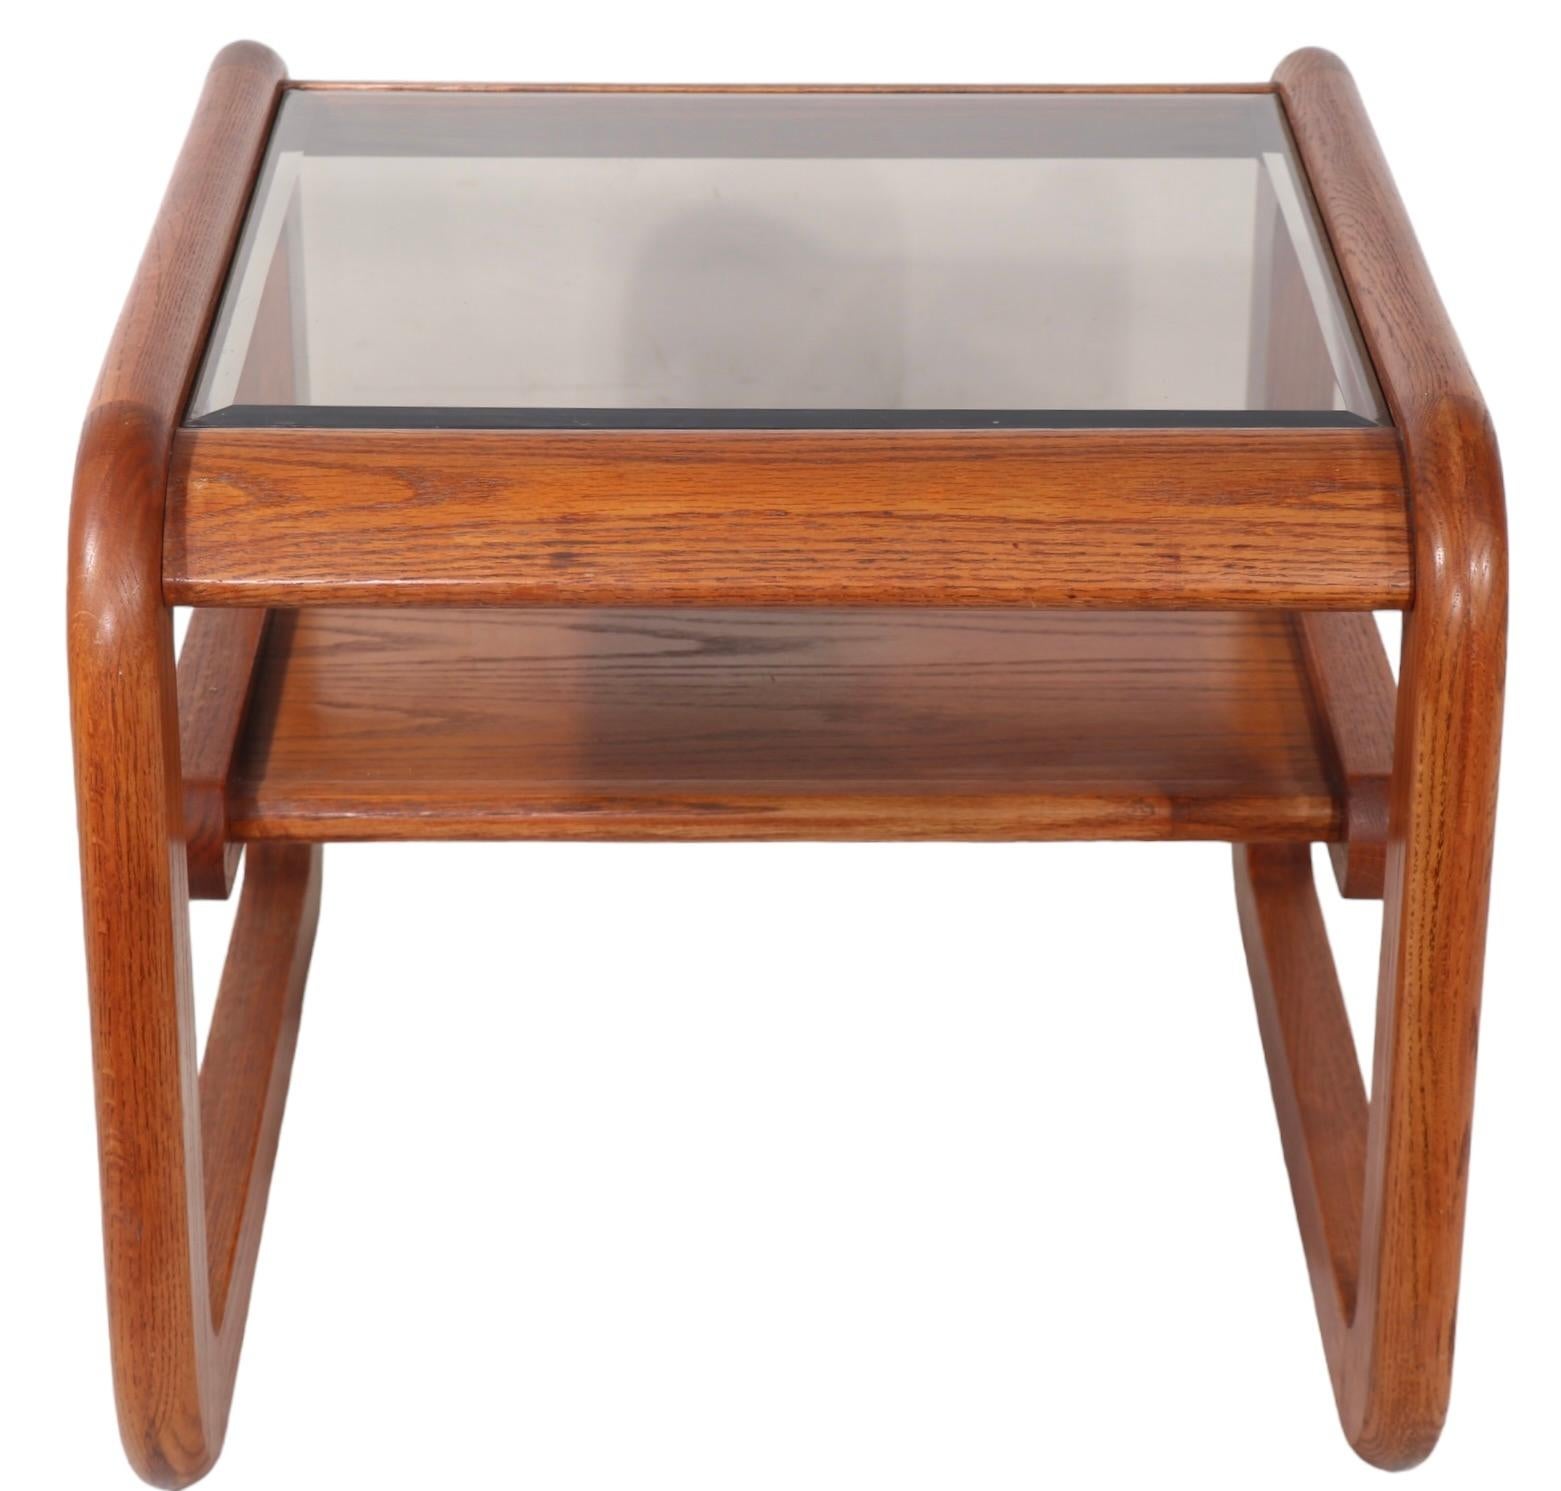 Glass Post Modern Square Mersman End Table designed by Lou Hodges for Mersman c. 1970s For Sale